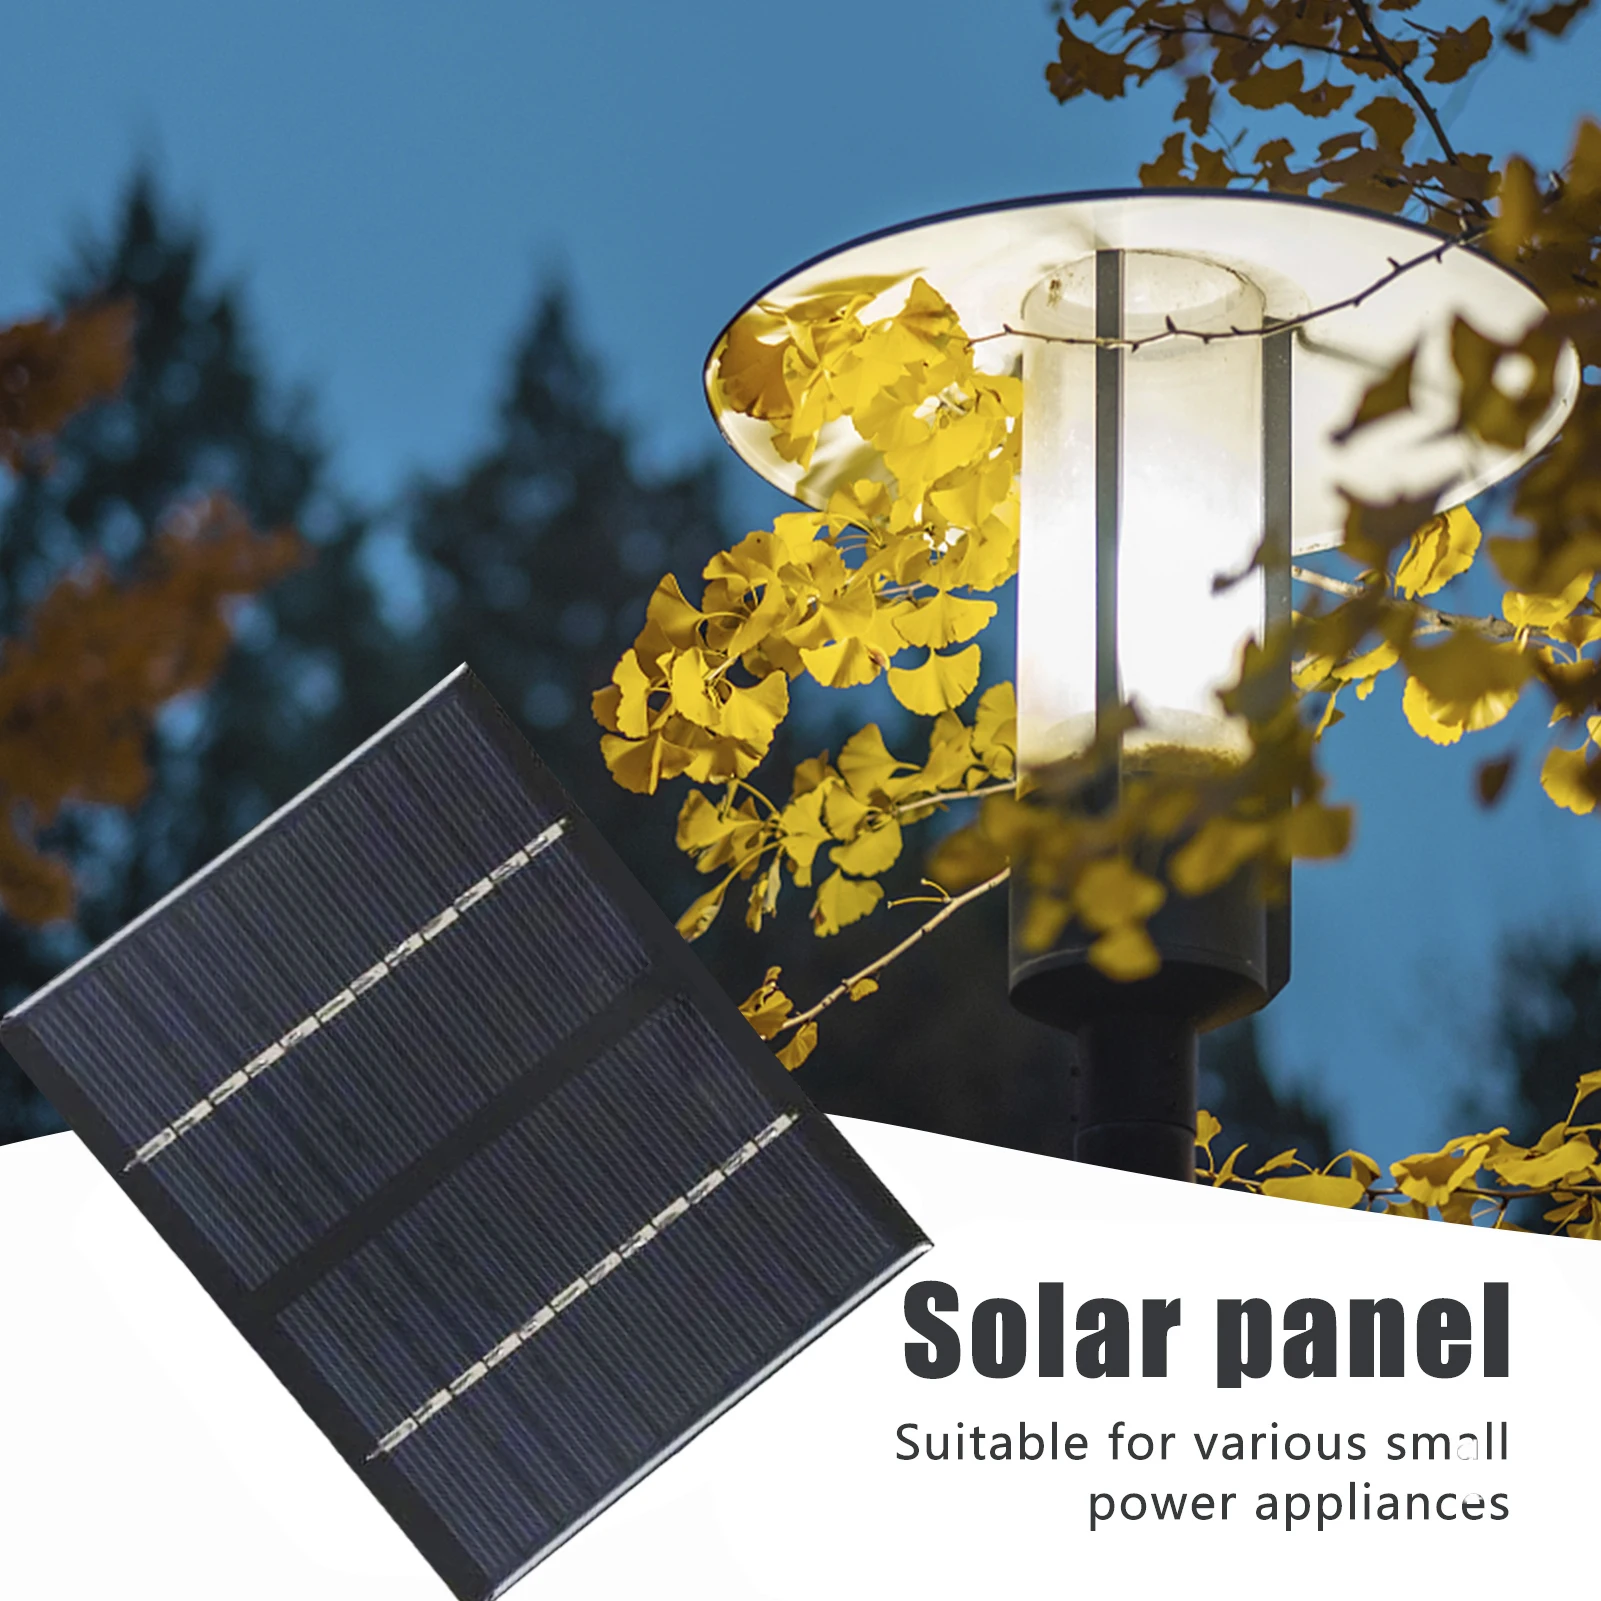 

1.5W 12V Waterproof Solar Panel Board Solar System DIY Polycrystalline Silicon Solar Cell Panel for Lighting Electronic Toys